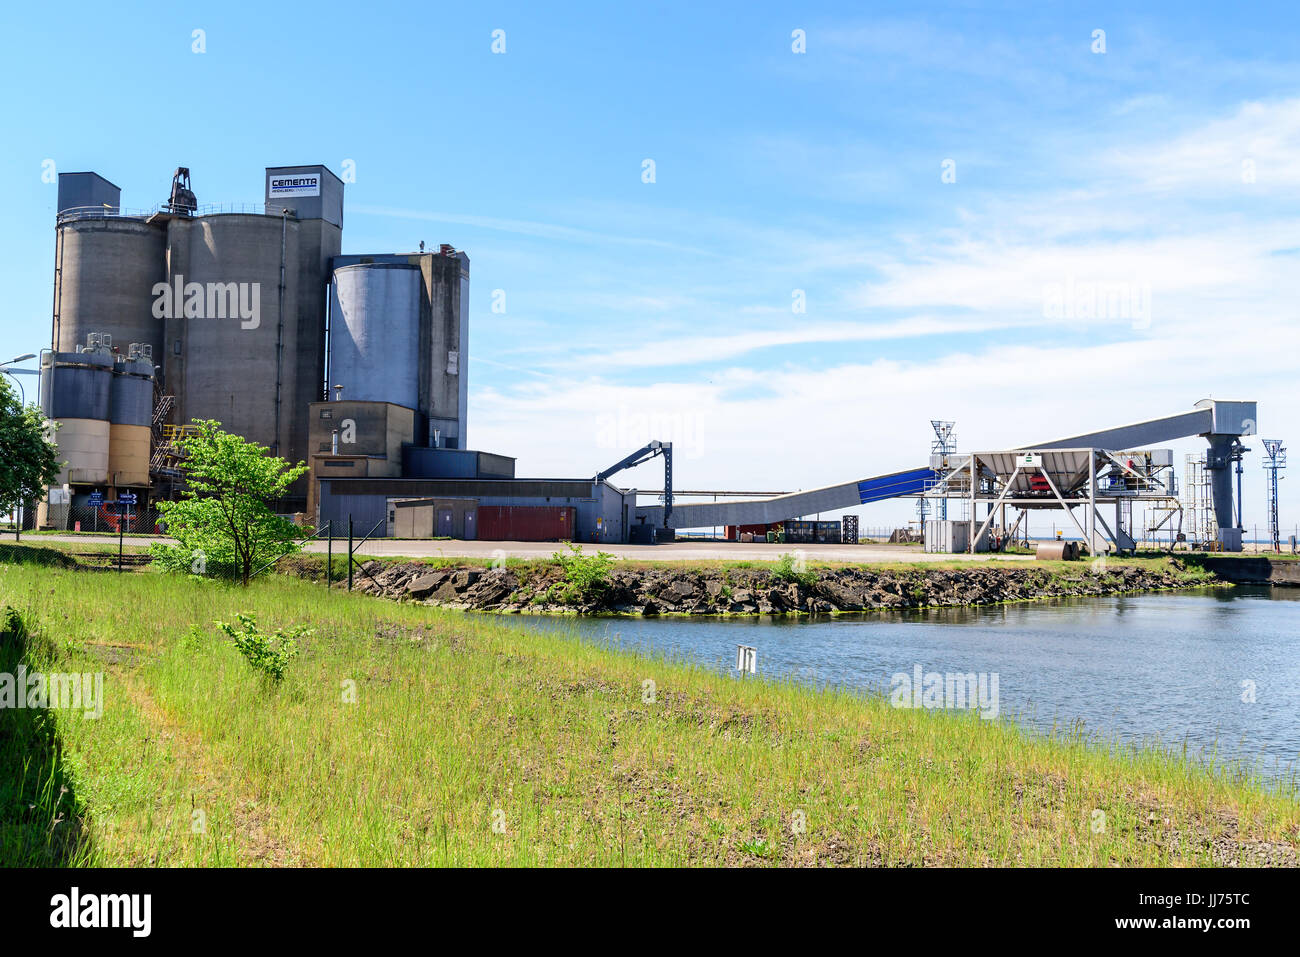 Degerhamn, Oland, Sweden - May 28, 2017: Environmental documentary of the coastal cement factory, here seen from the docks north of the industry. Stock Photo